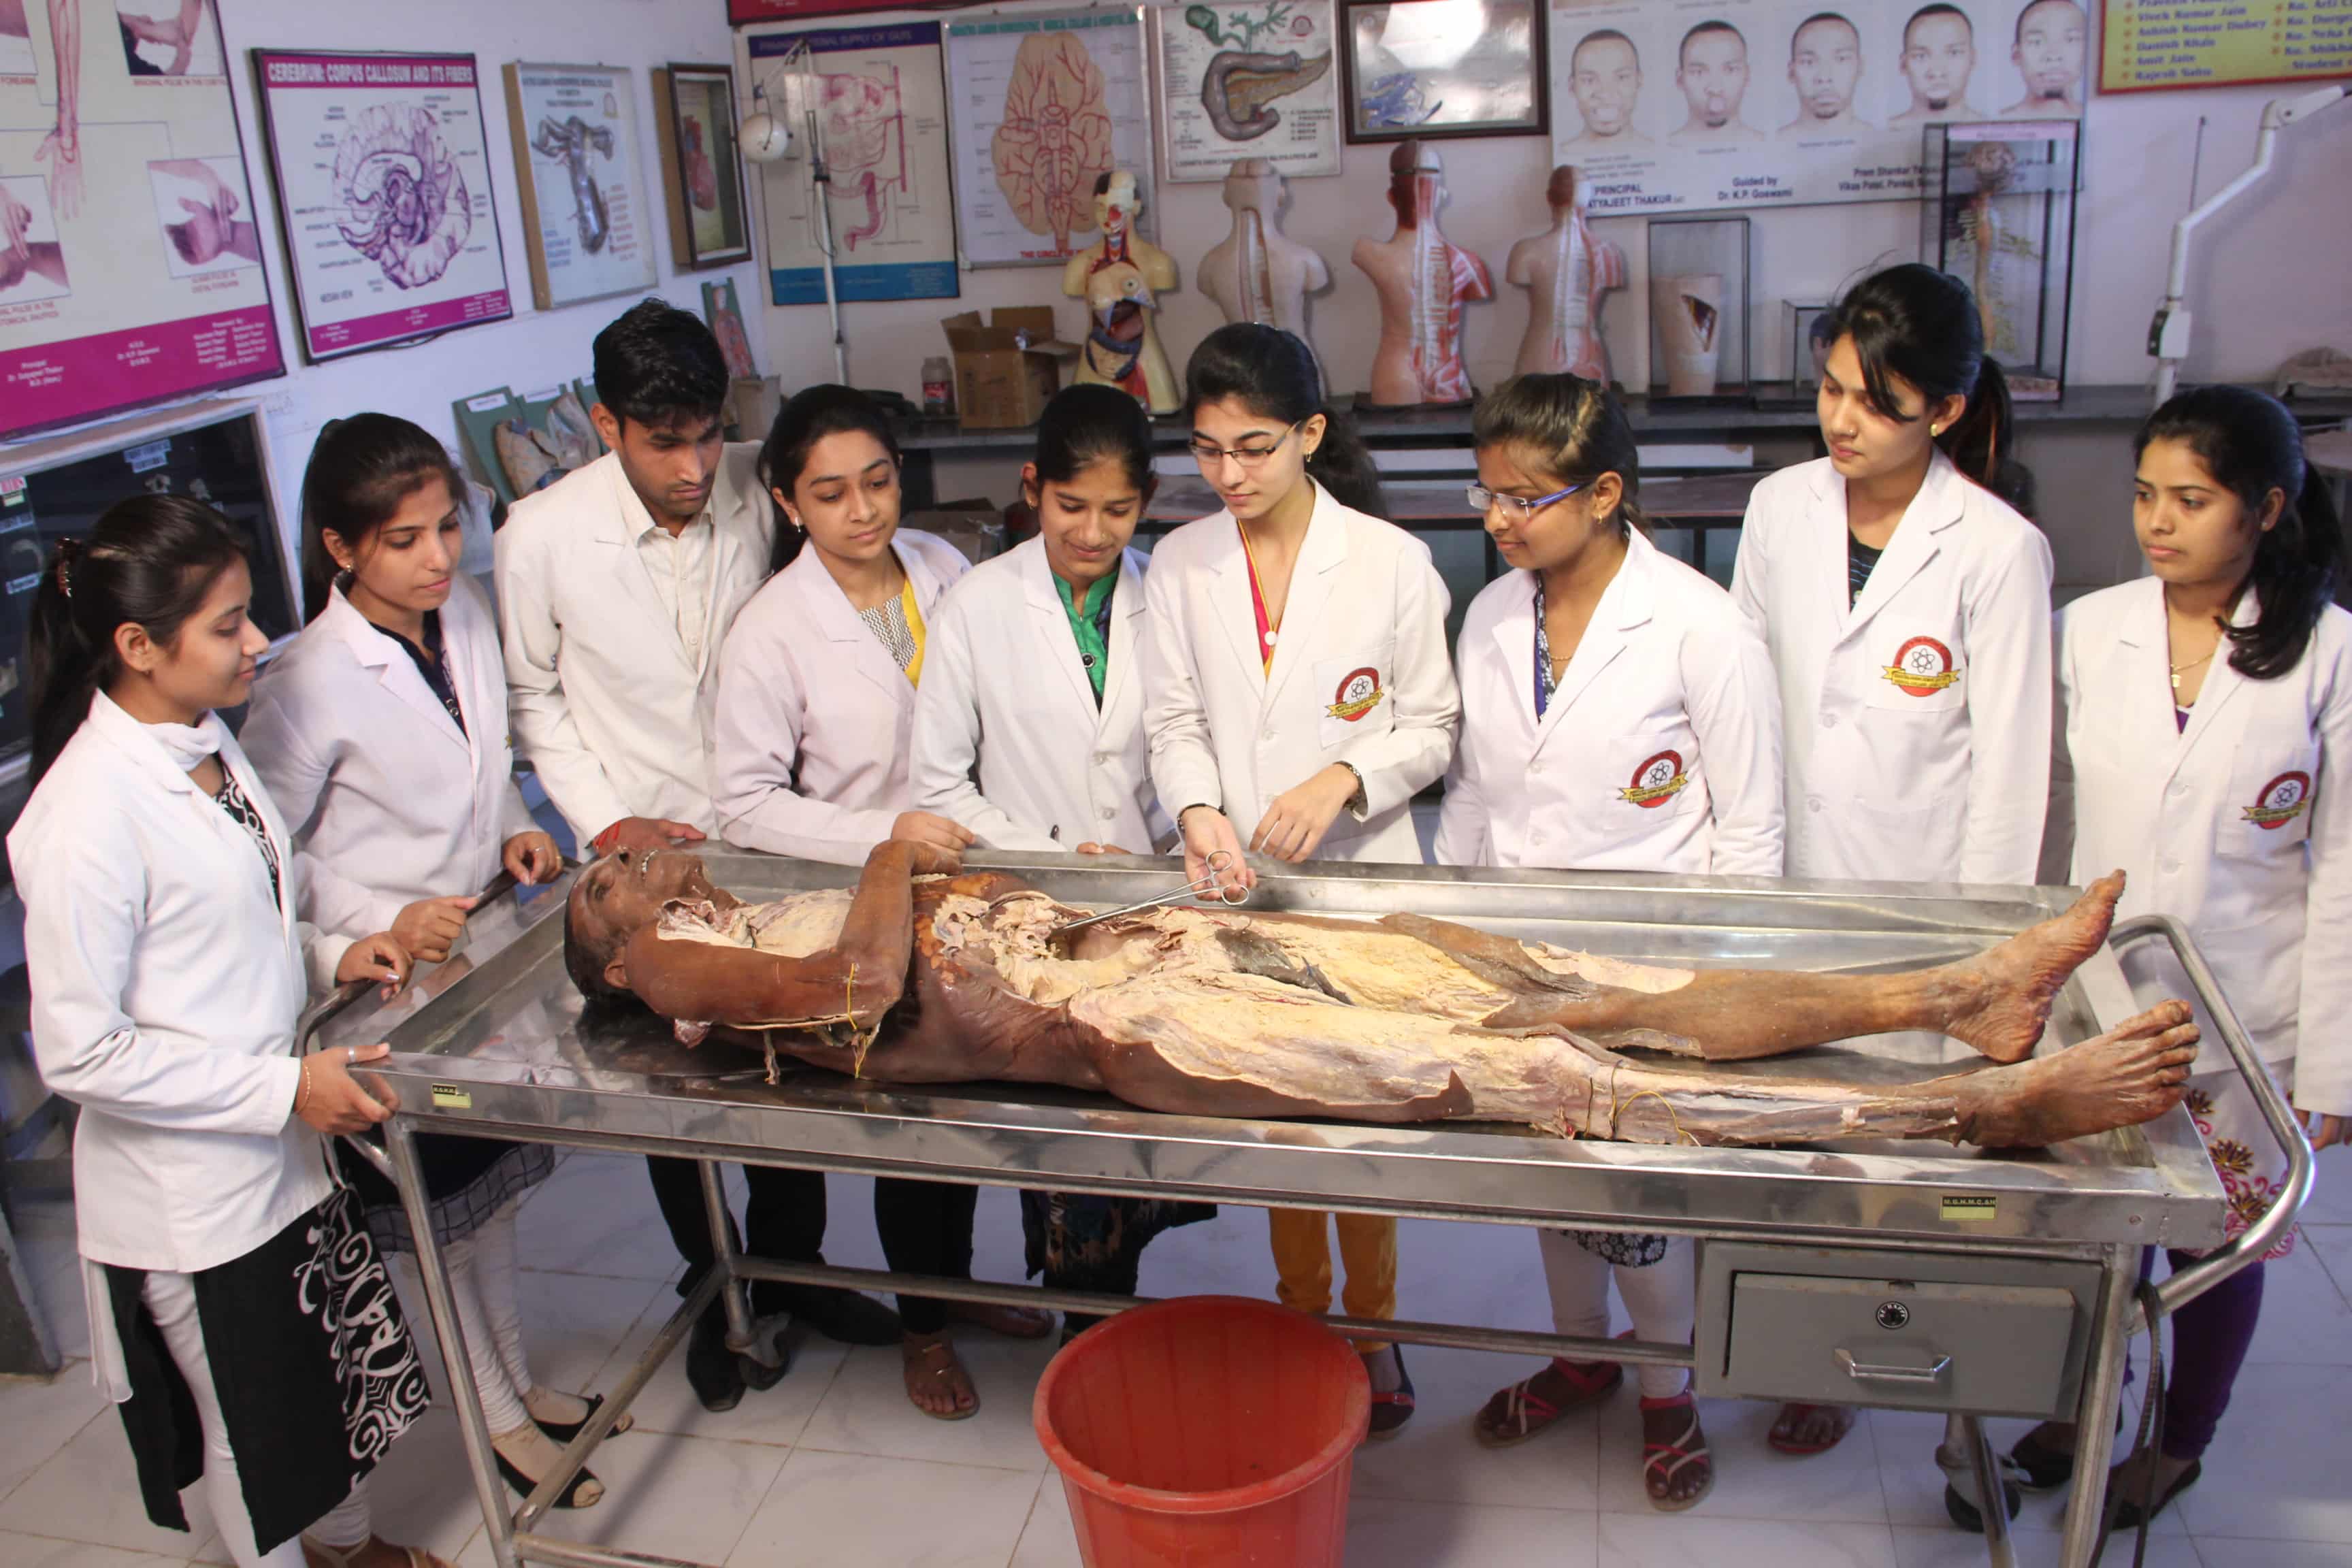 Students performing surgery in a lab.